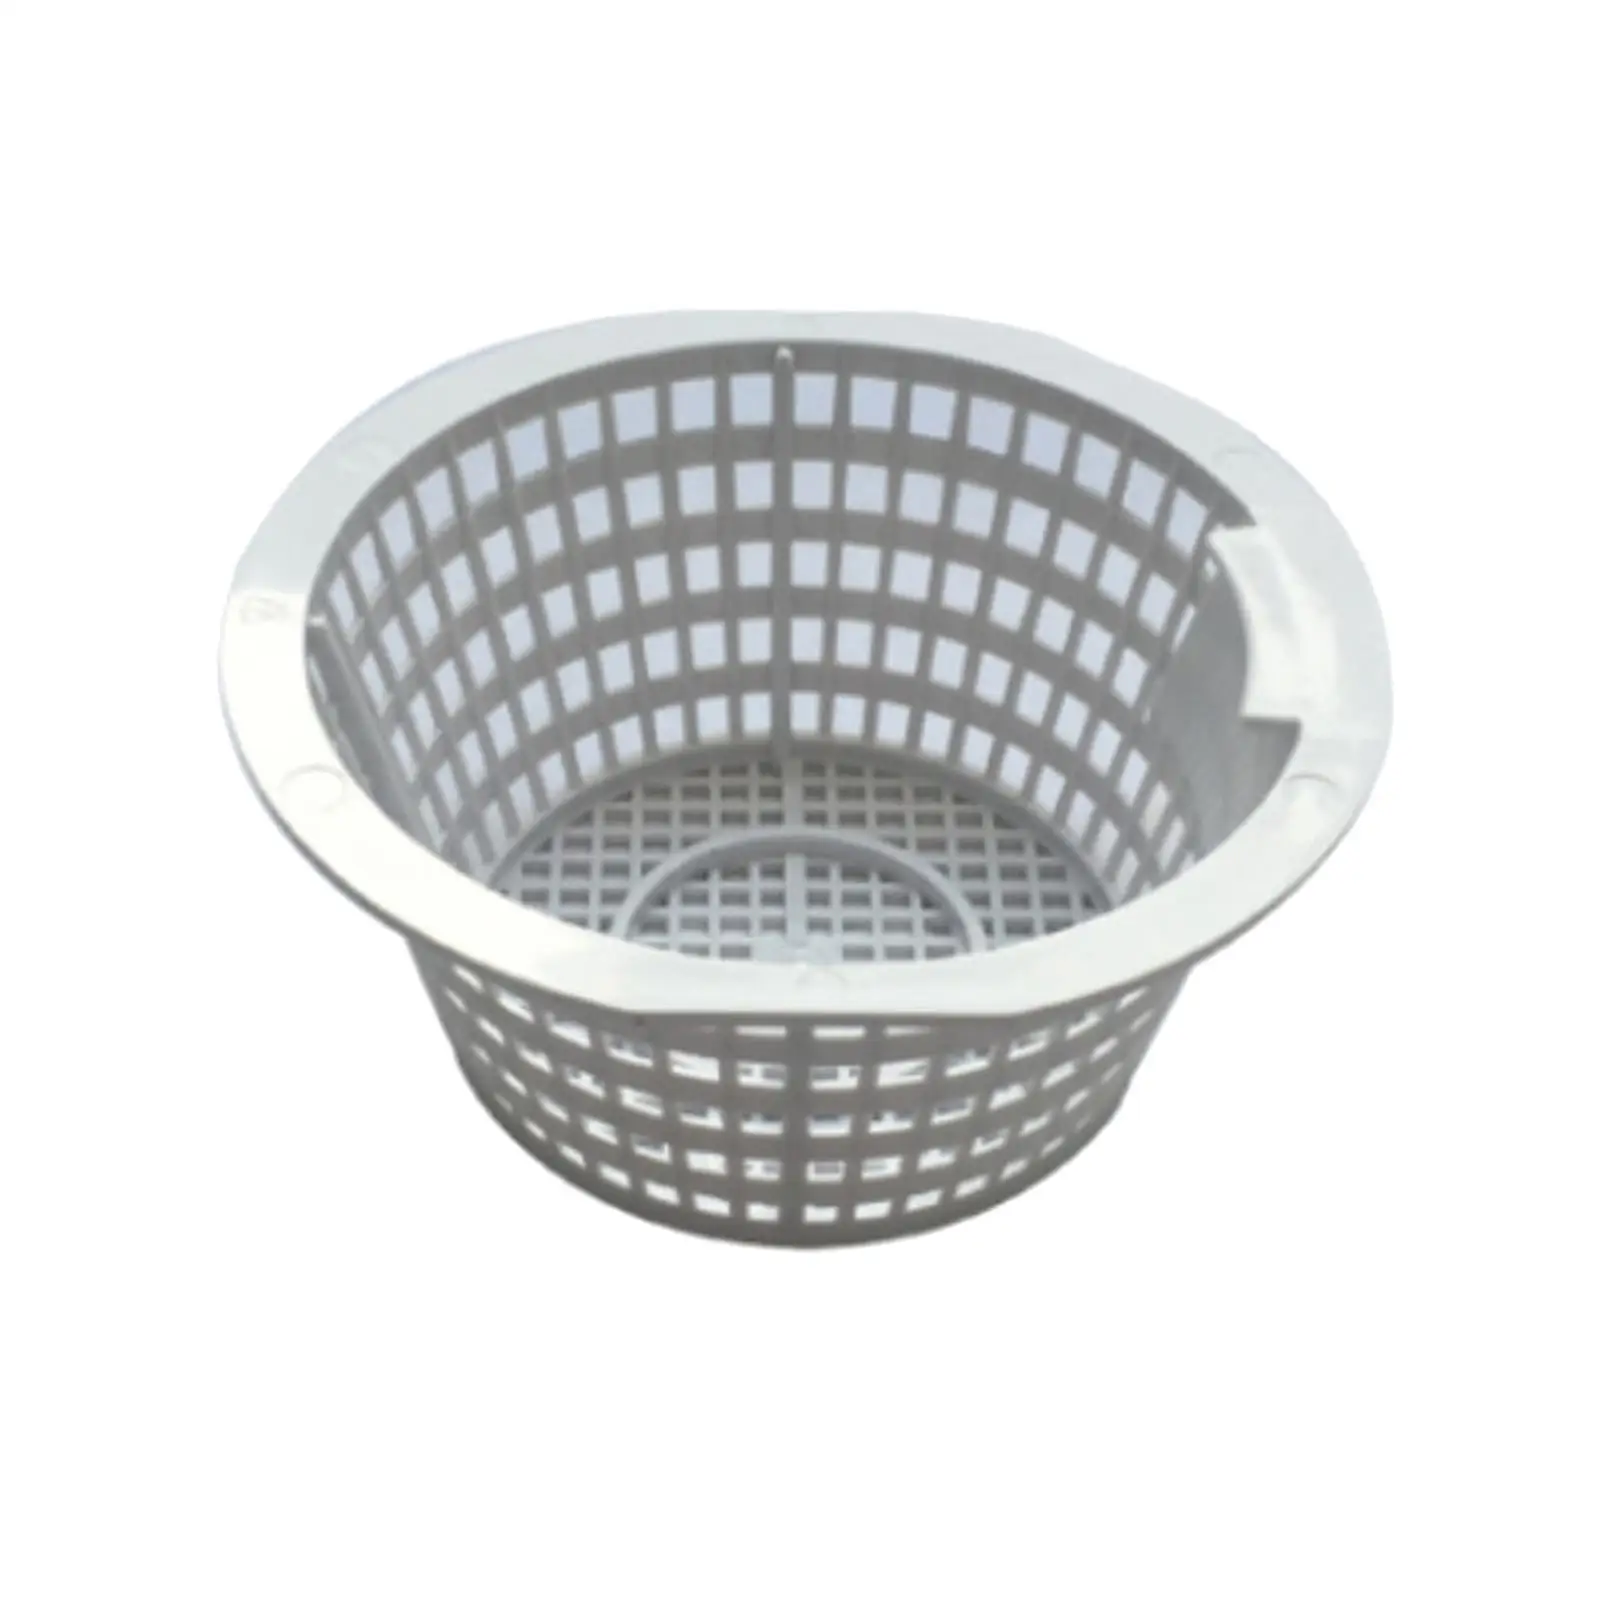 Pool Skimmer Basket Reusable Fittings Cleaning Tool Portable Aboveground Cleaner Catcher for Cleaning Scum Swimming Pool Debris